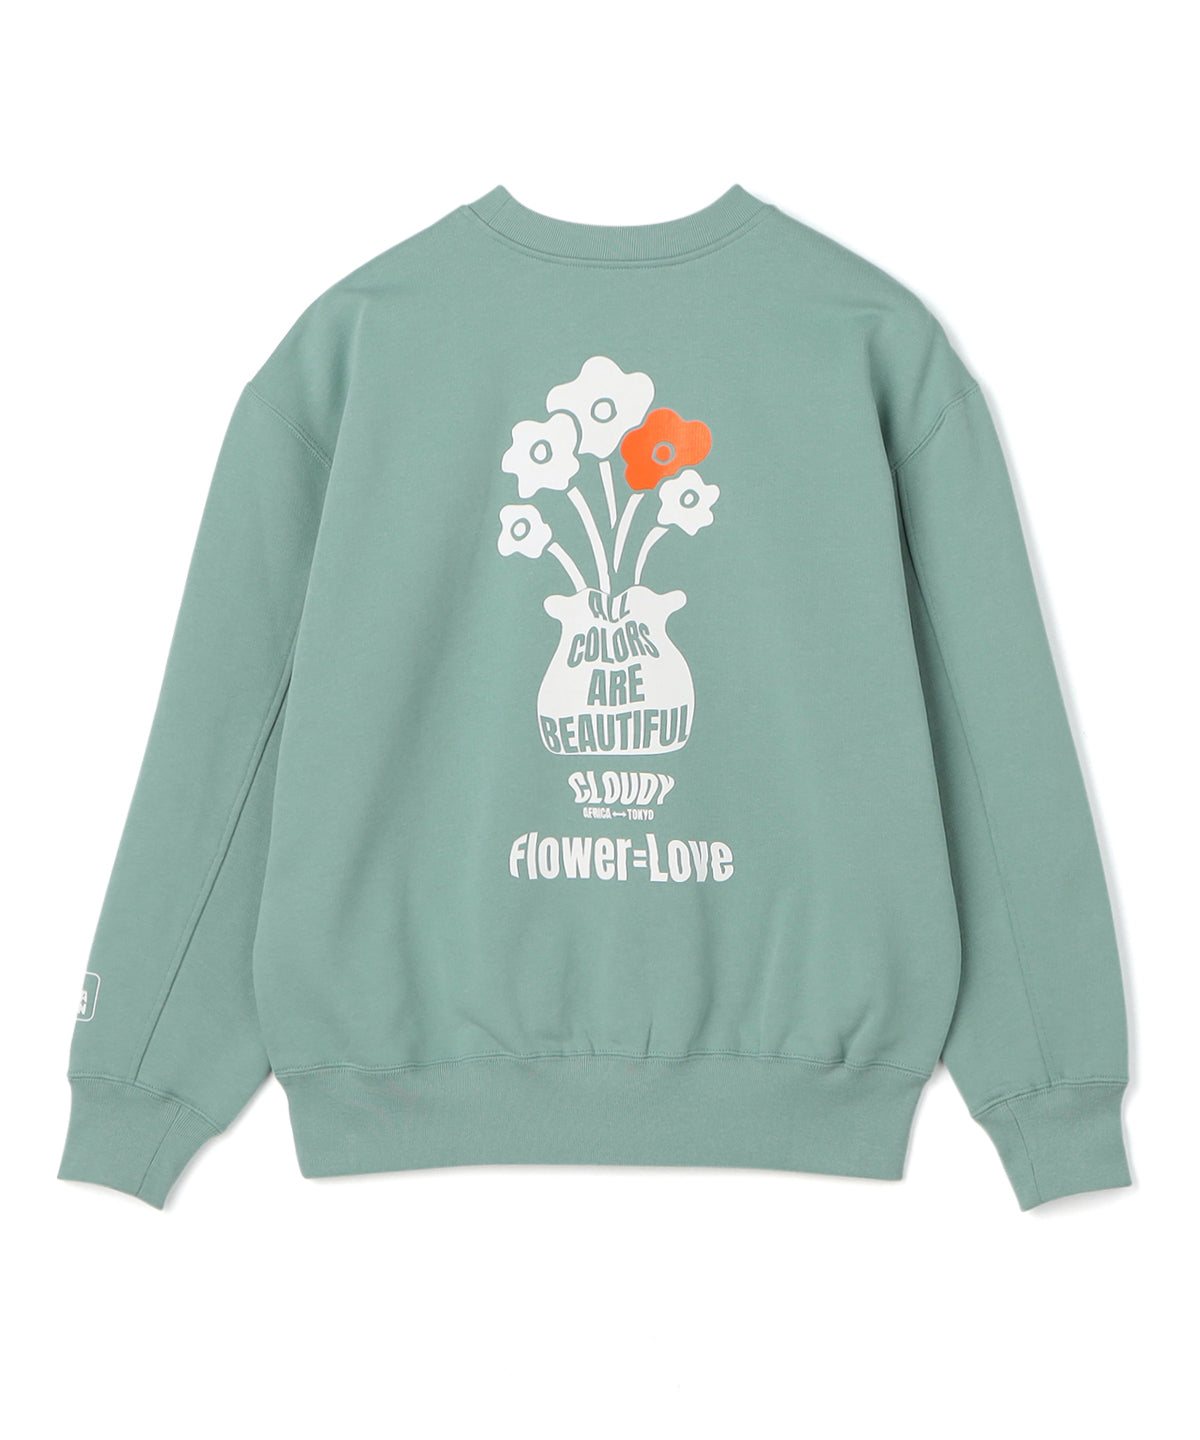 Sweat Shirts All Colors Are Beautiful ICE GREEN